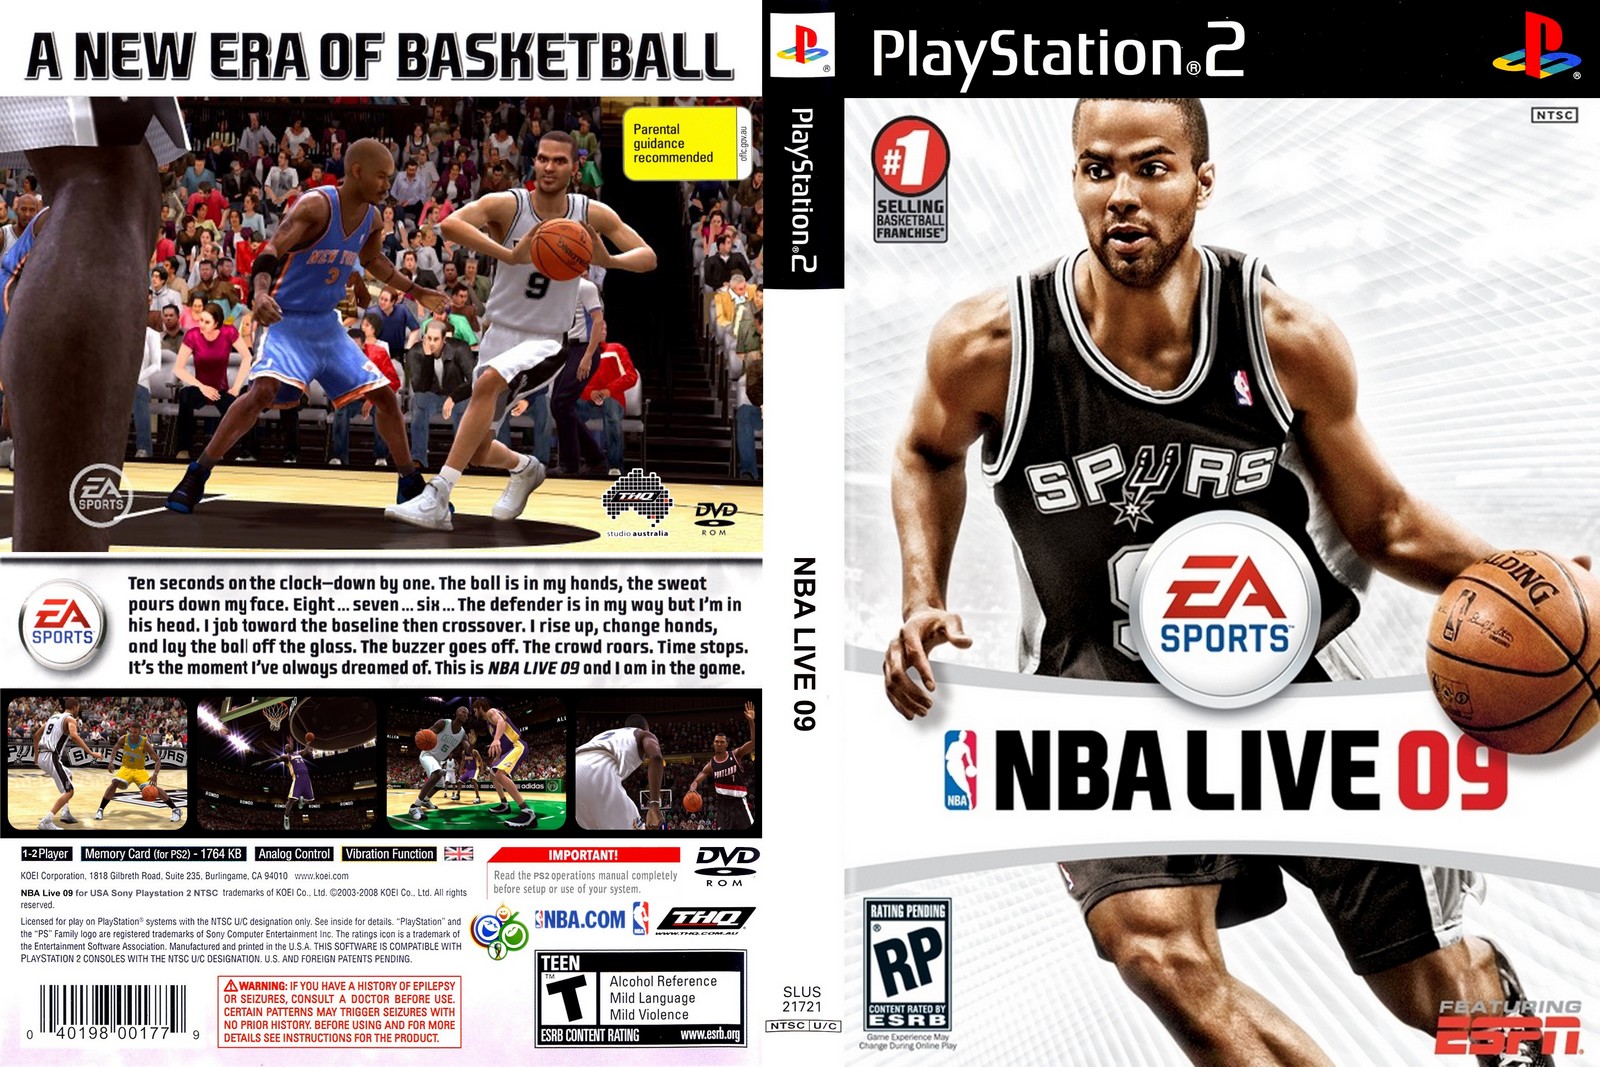 nba live 09 ps2 image search results